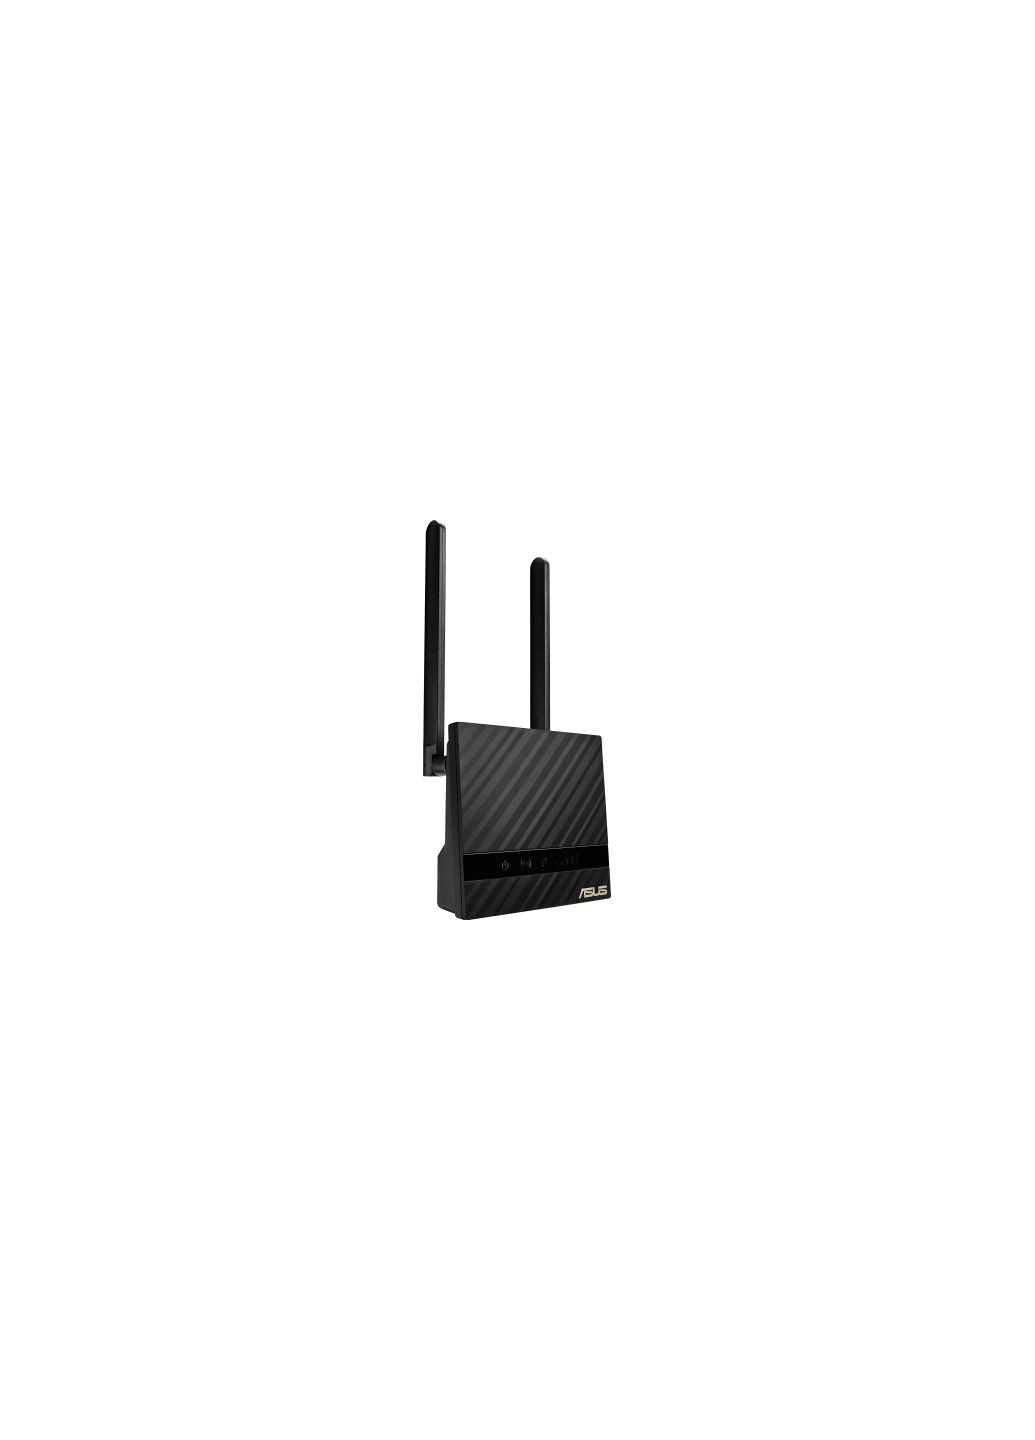 Маршрутизатор 4GN16 Asus 4g-n16 (278312059)